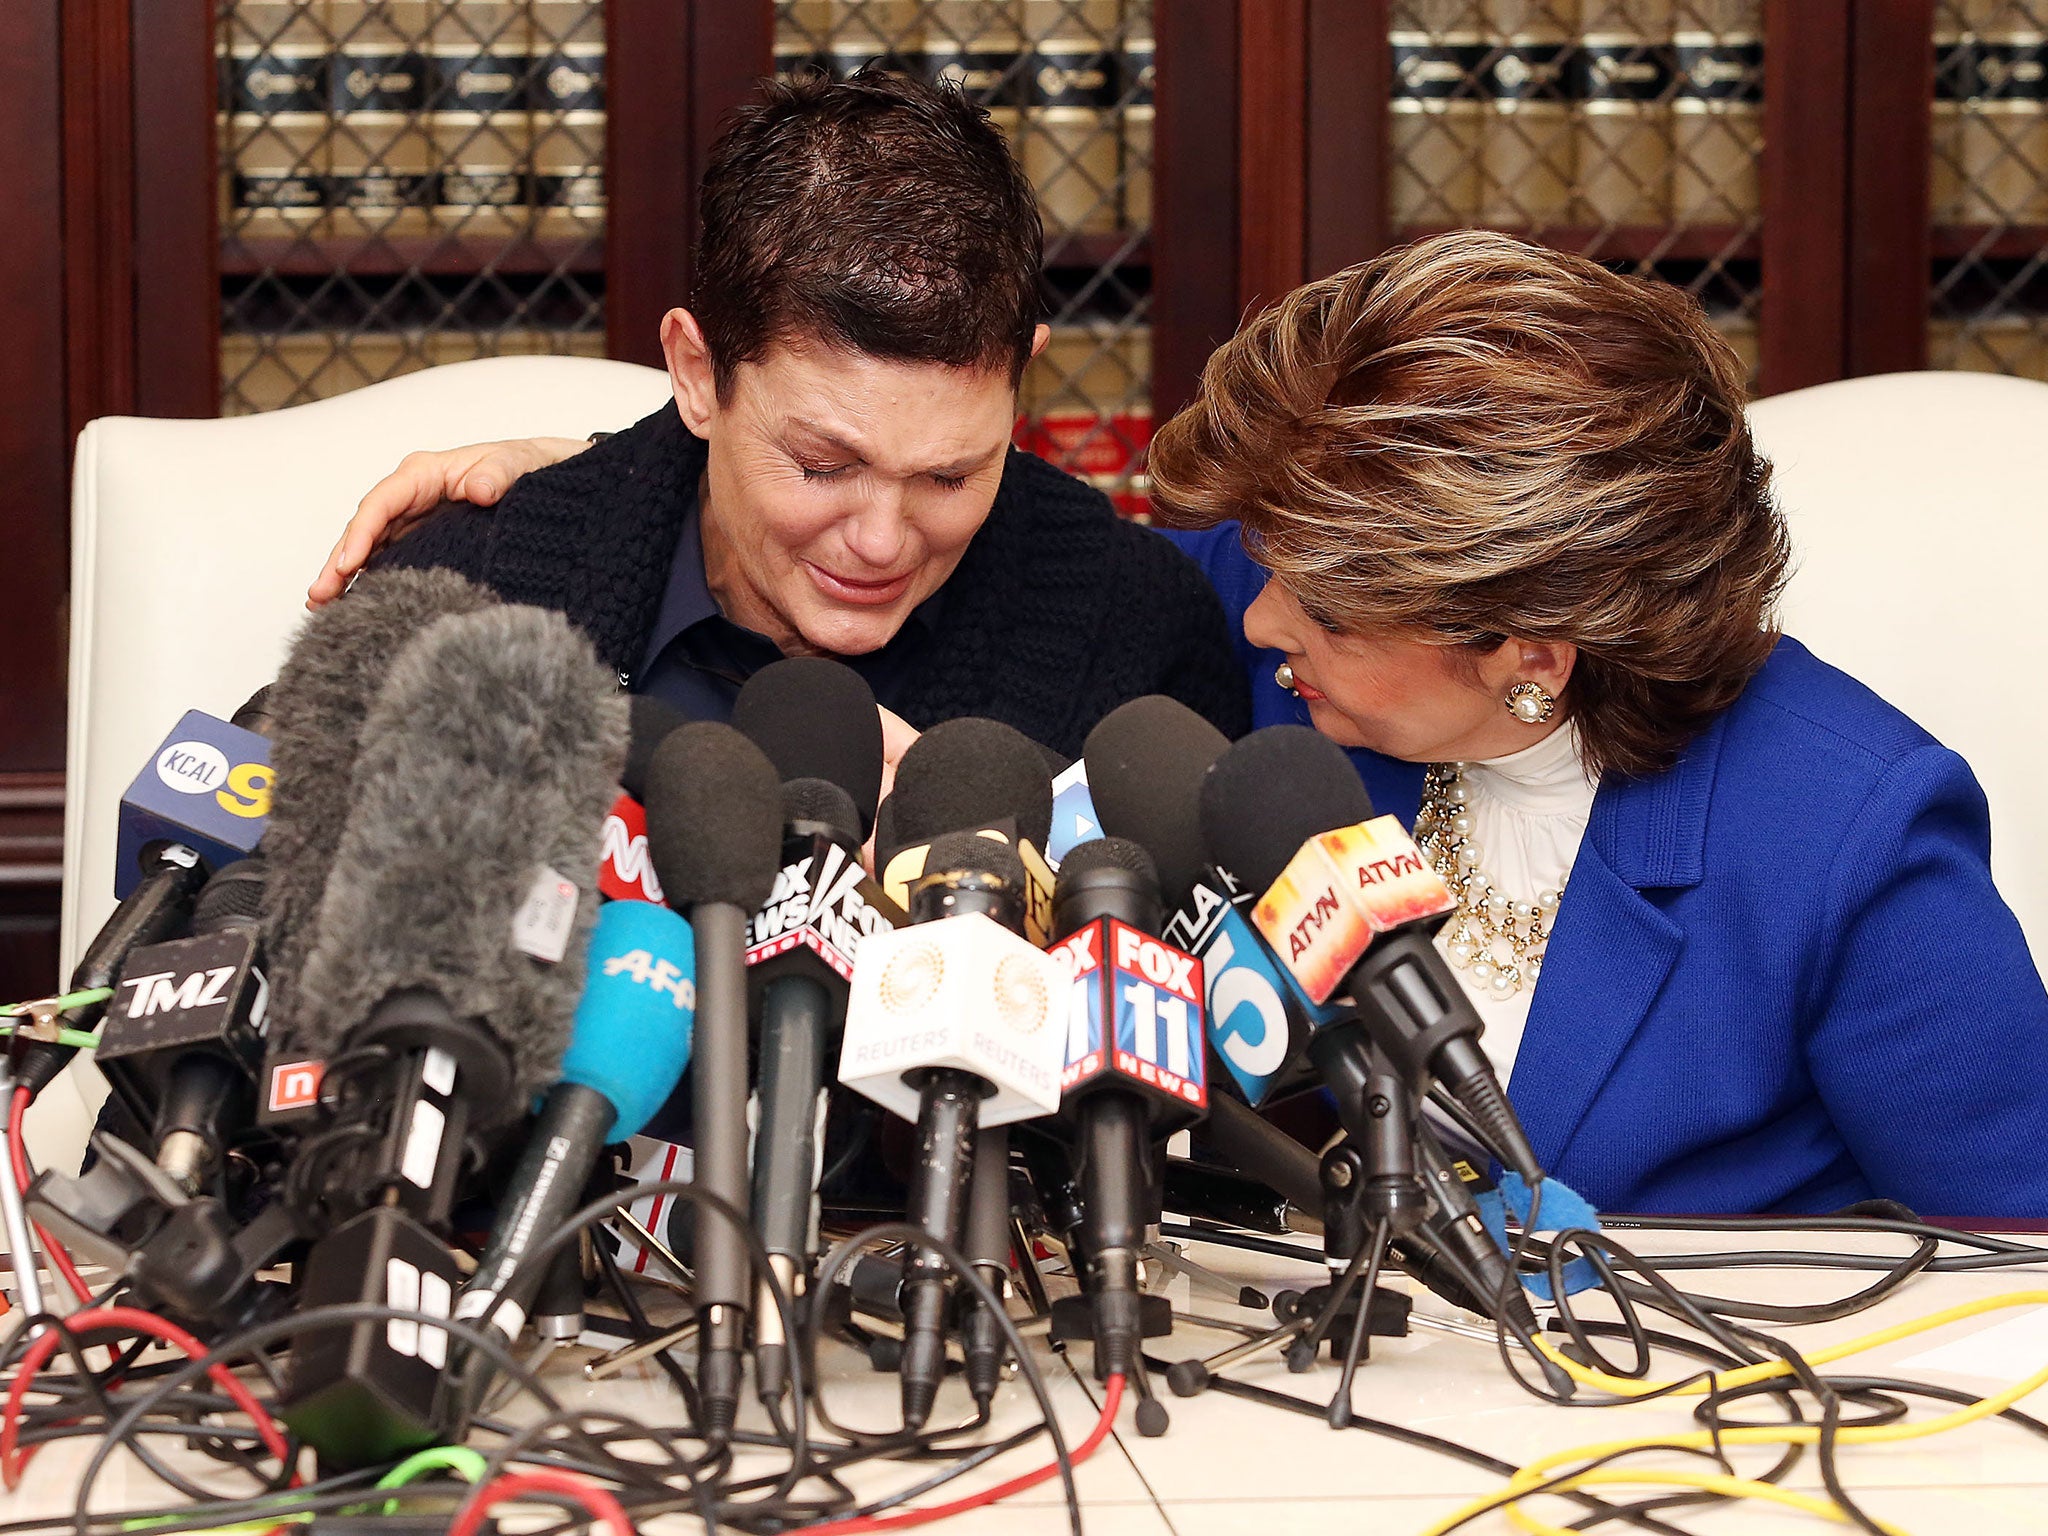 Attorney Gloria Allred speaks at a press conference with Beth Ferrier on December 3, 2014 in Los Angeles, California.